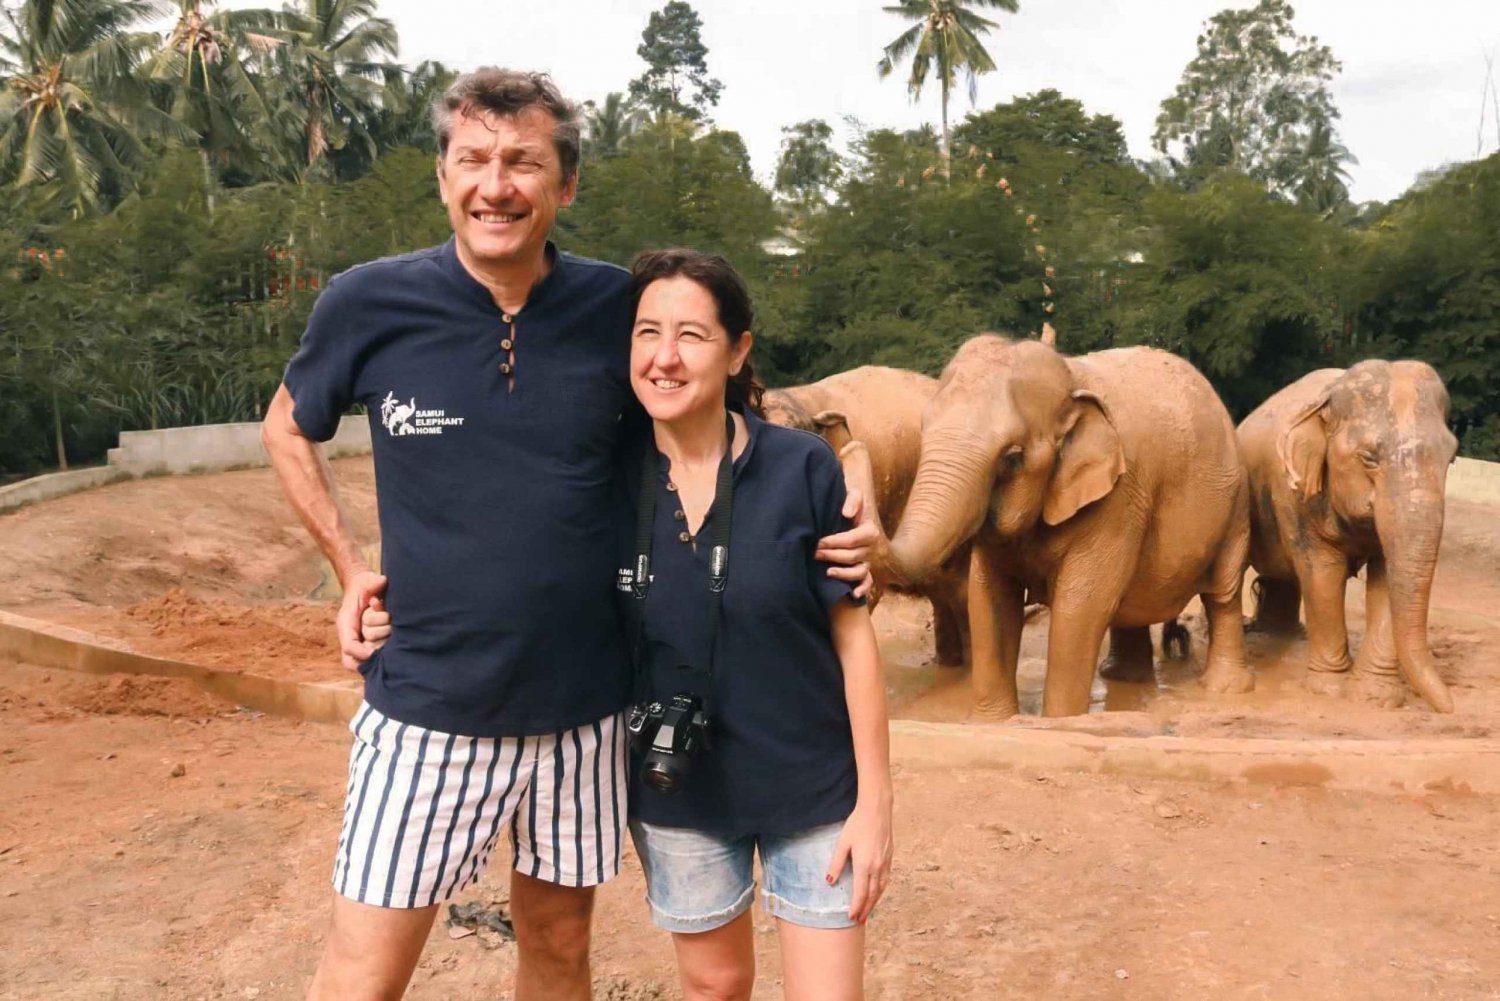 Koh Samui: Ethical Elephant Home Guided Tour with Transfers